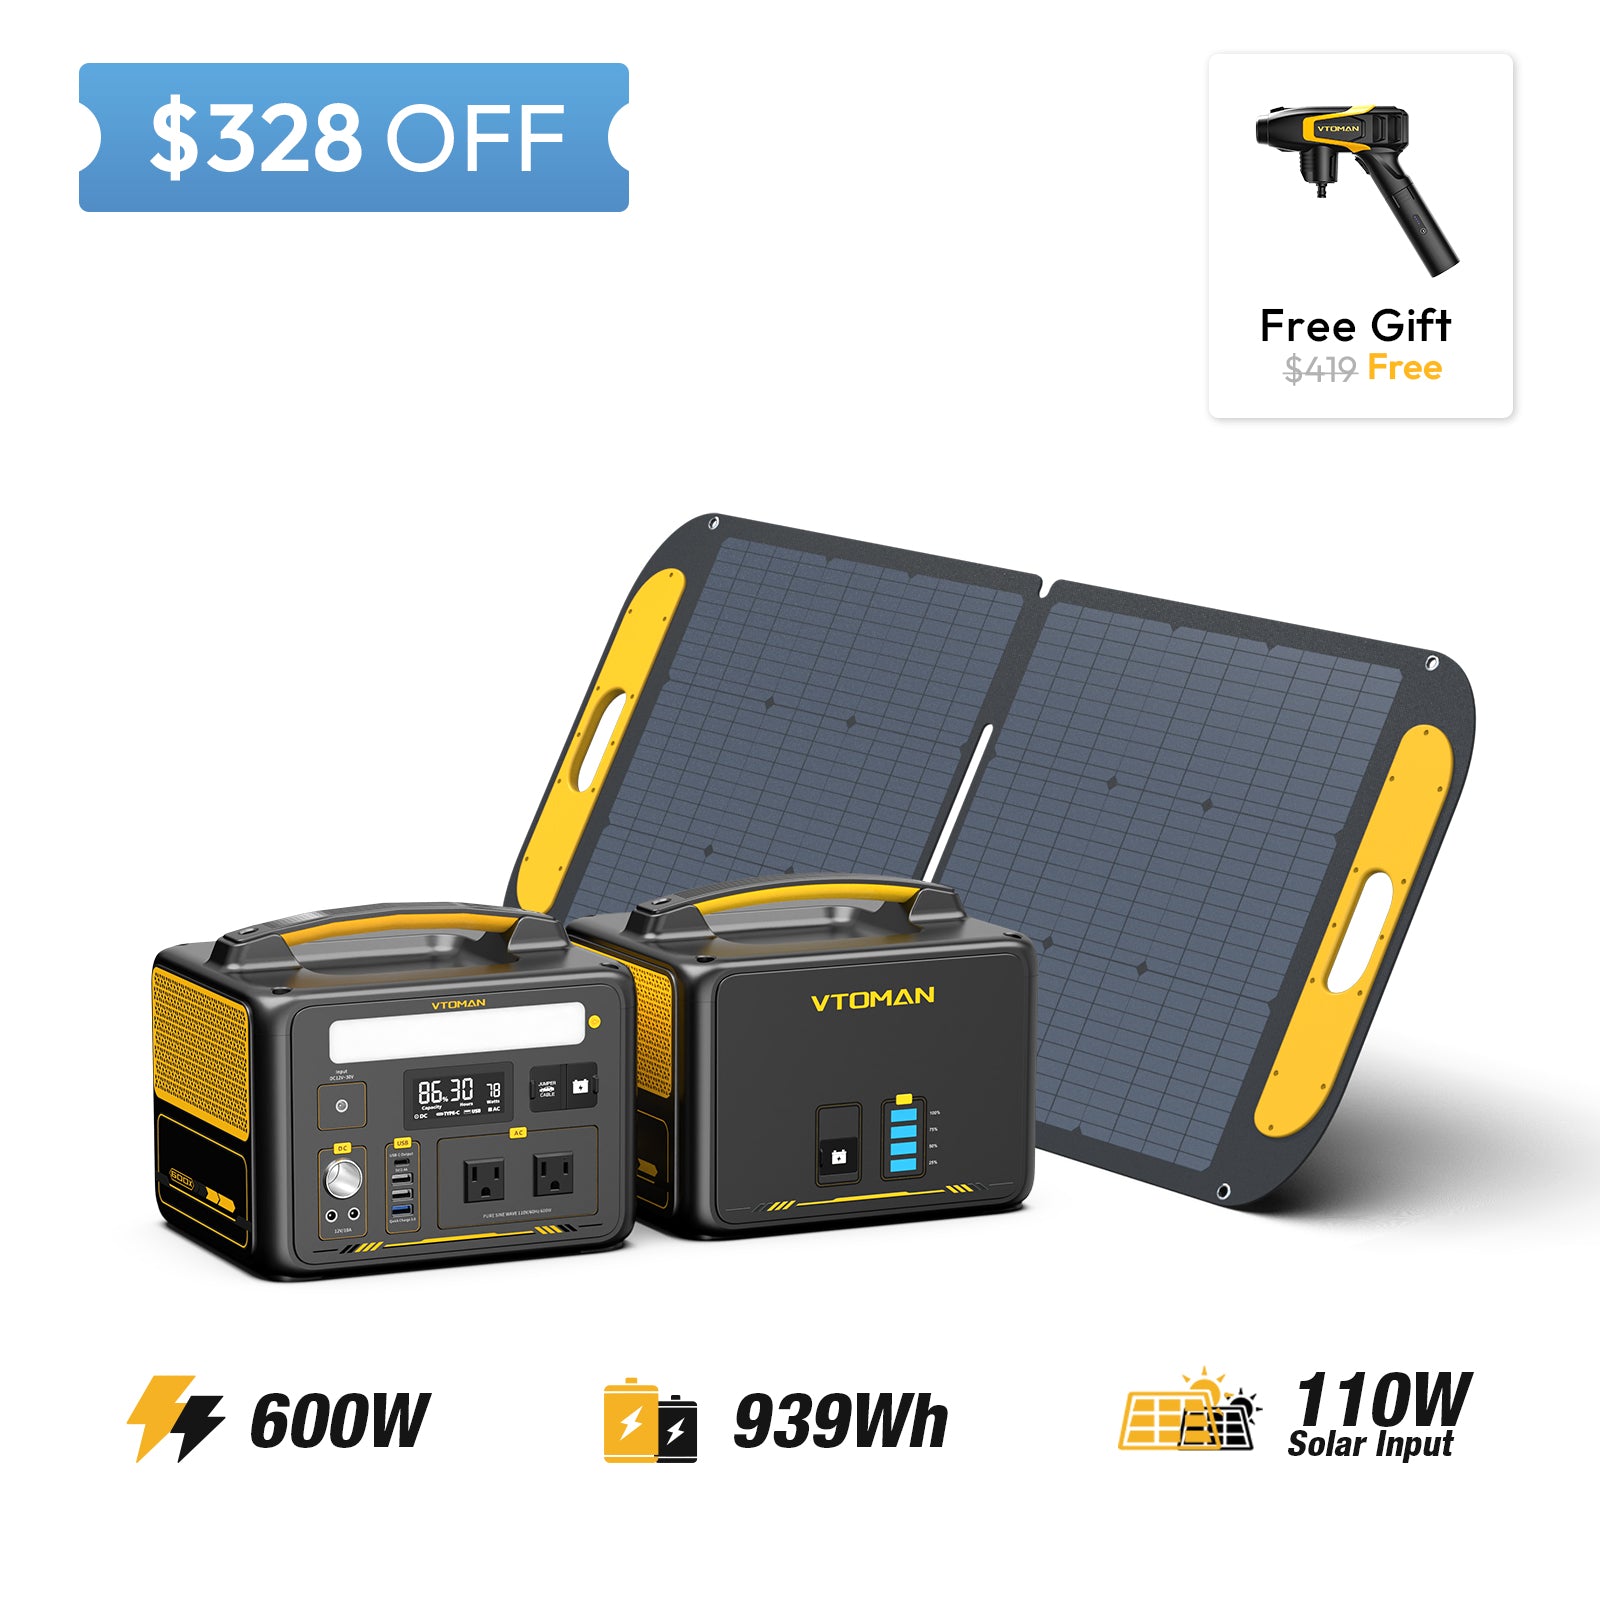 jump 600x and 640wh extra battery and 110w solar panel save $328 in summer sale